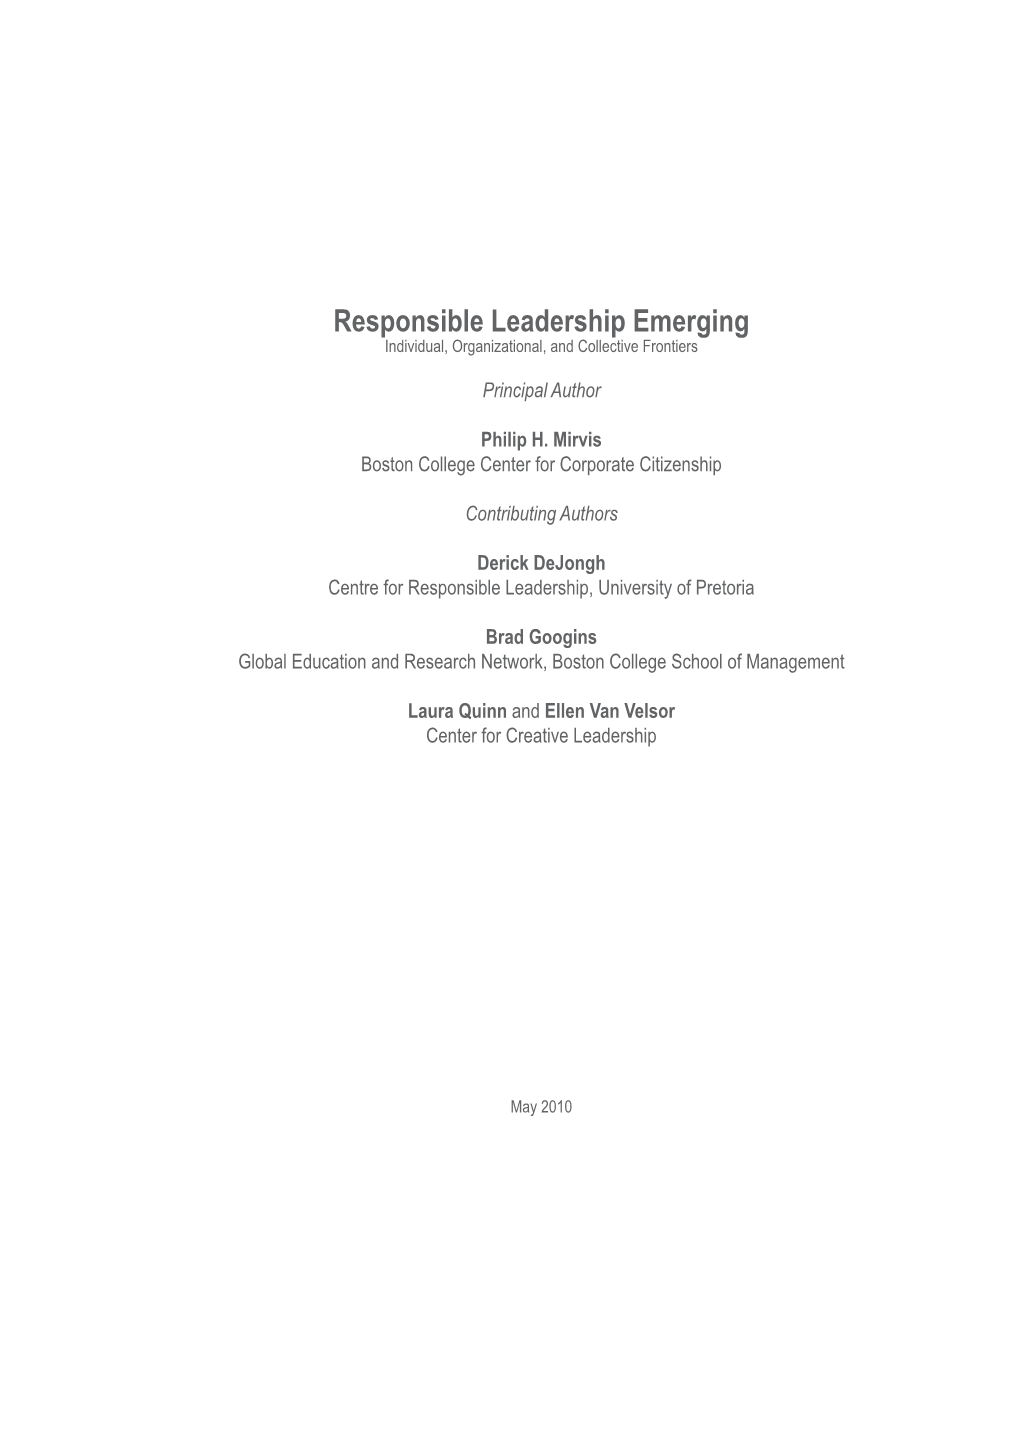 Responsible Leadership Emerging Individual, Organizational, and Collective Frontiers